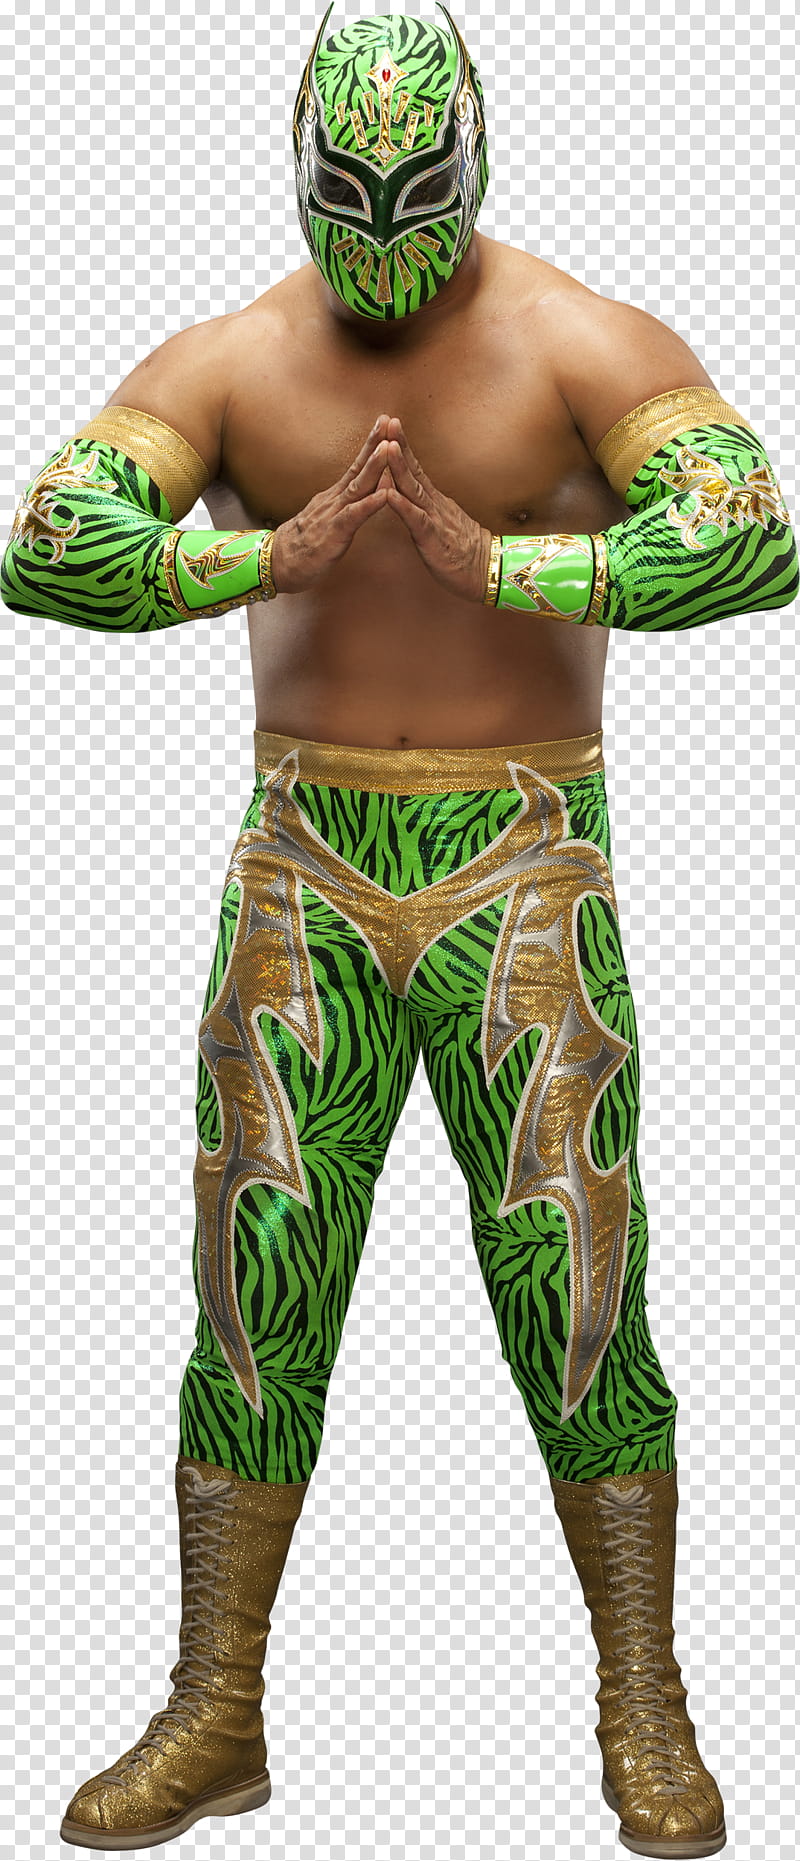 Sin Cara transparent background PNG clipart